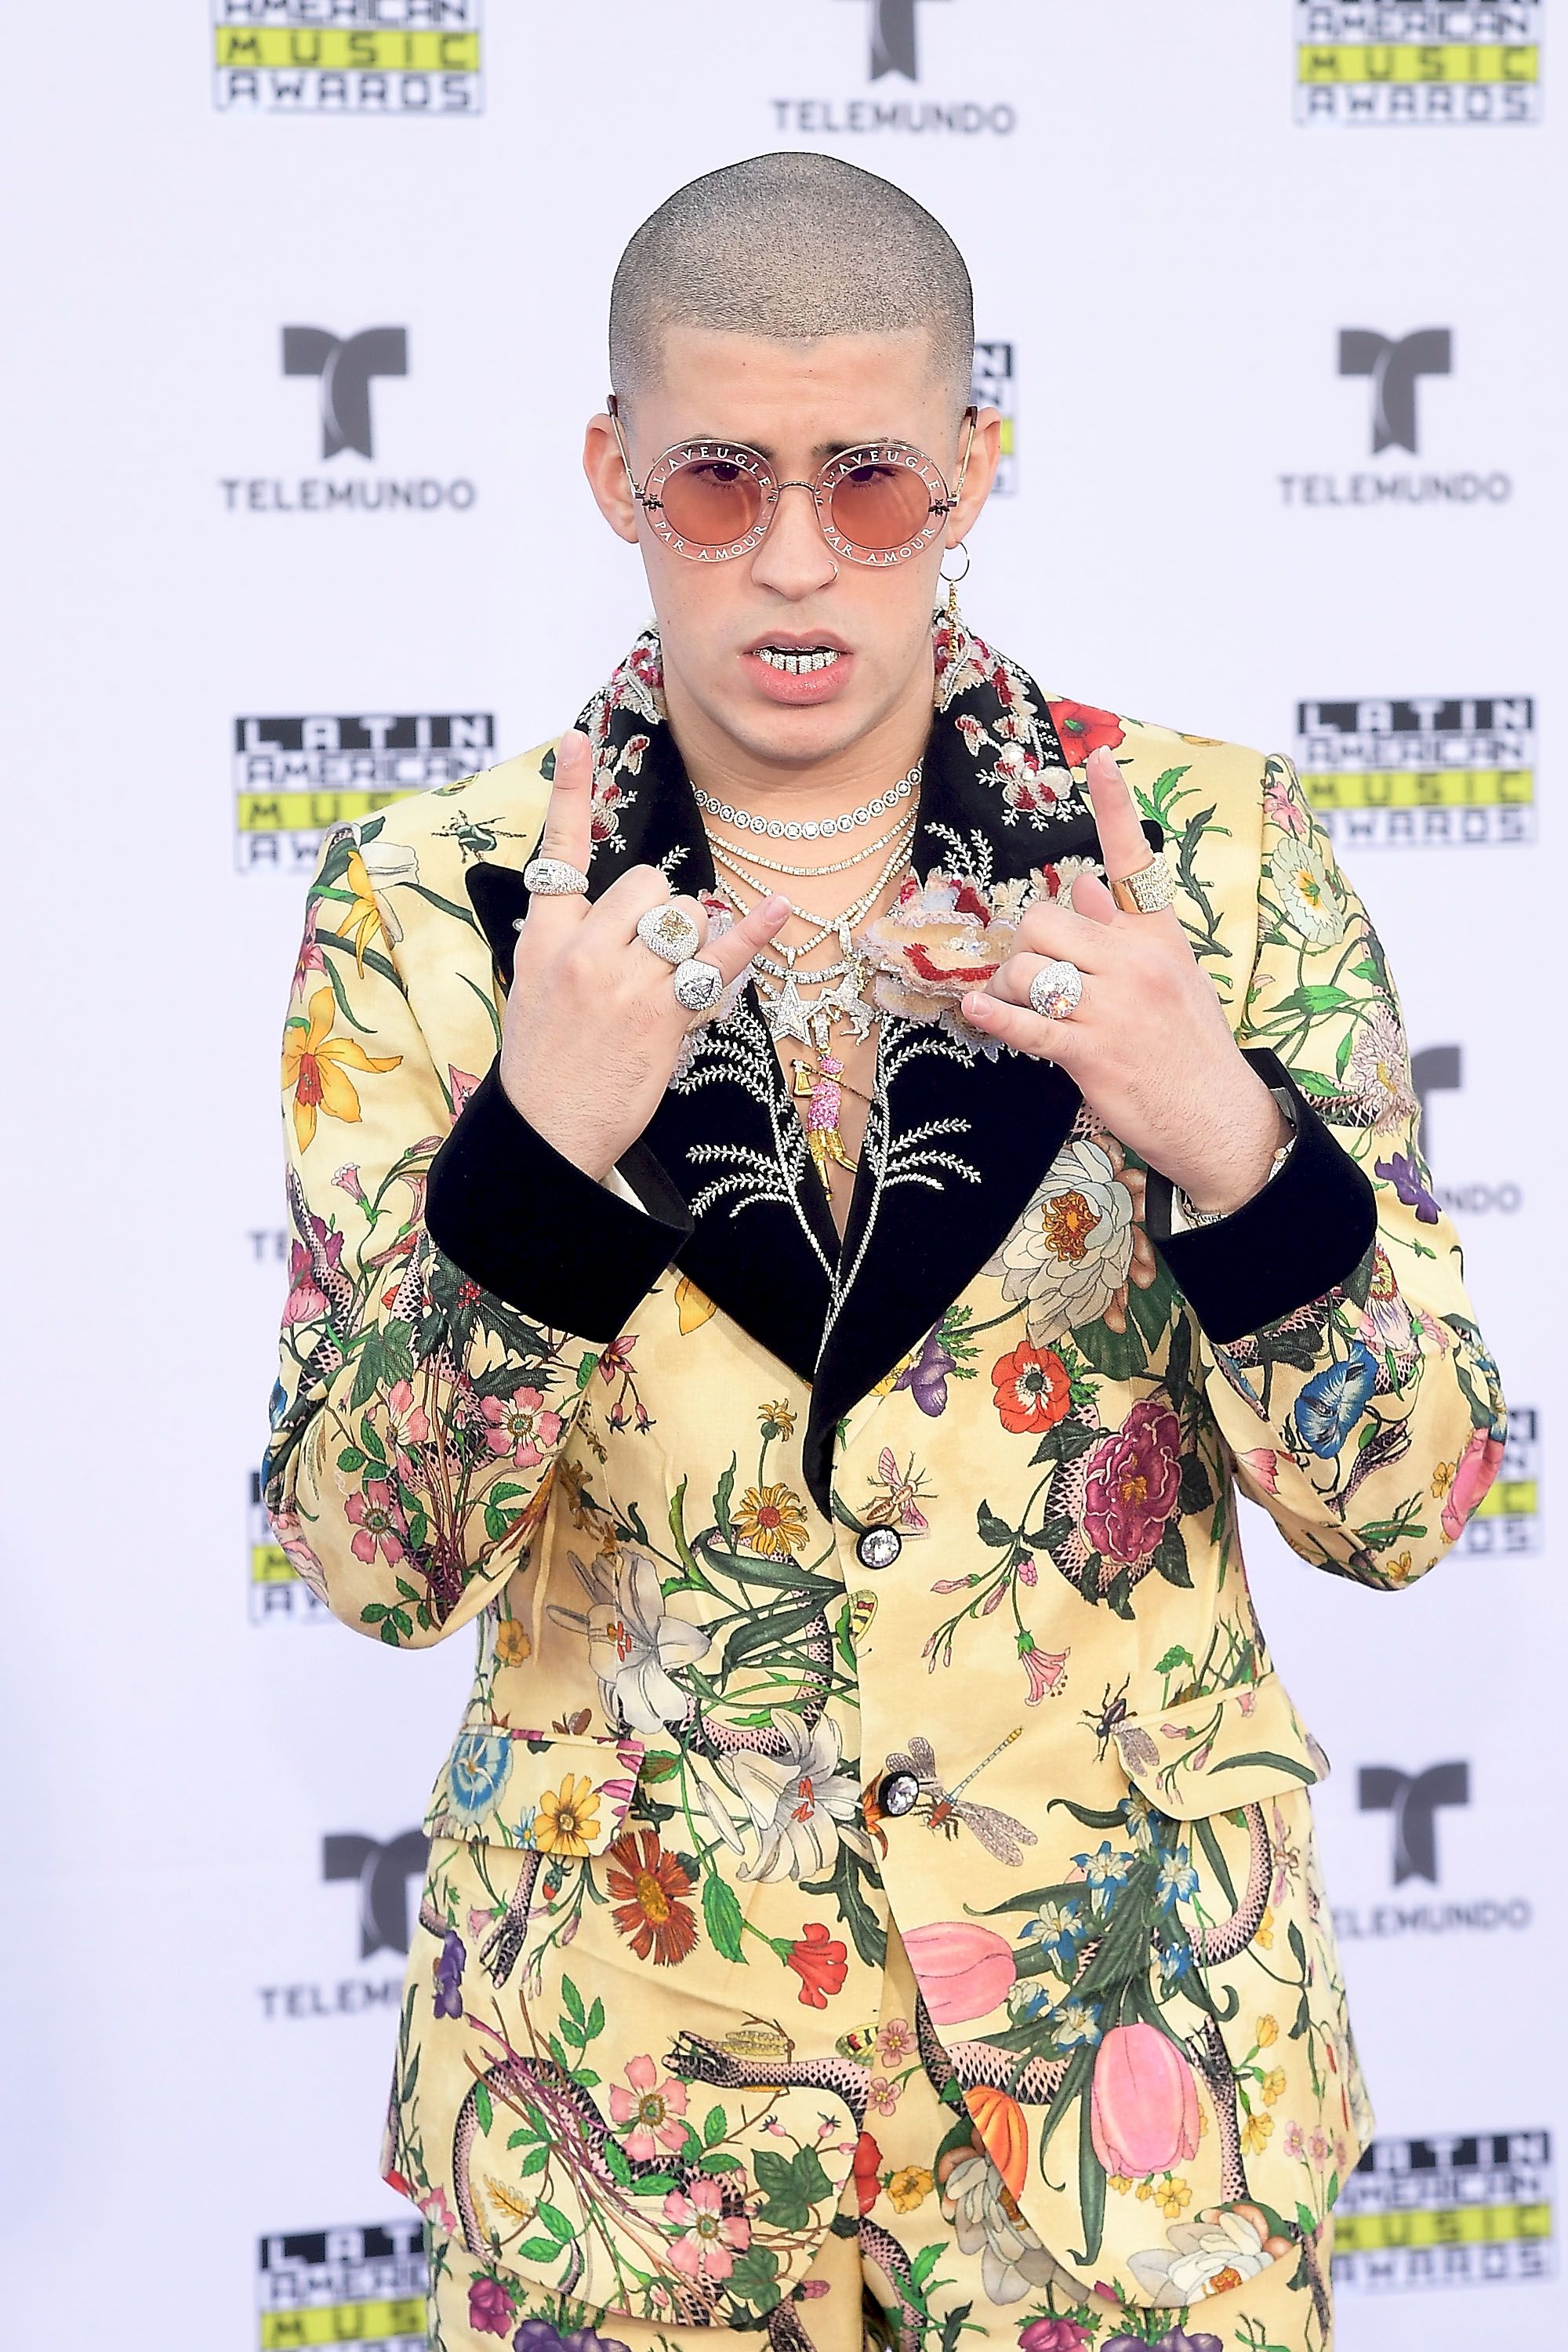 In pink, florals and short shorts, Bad Bunny champions a new masculinity